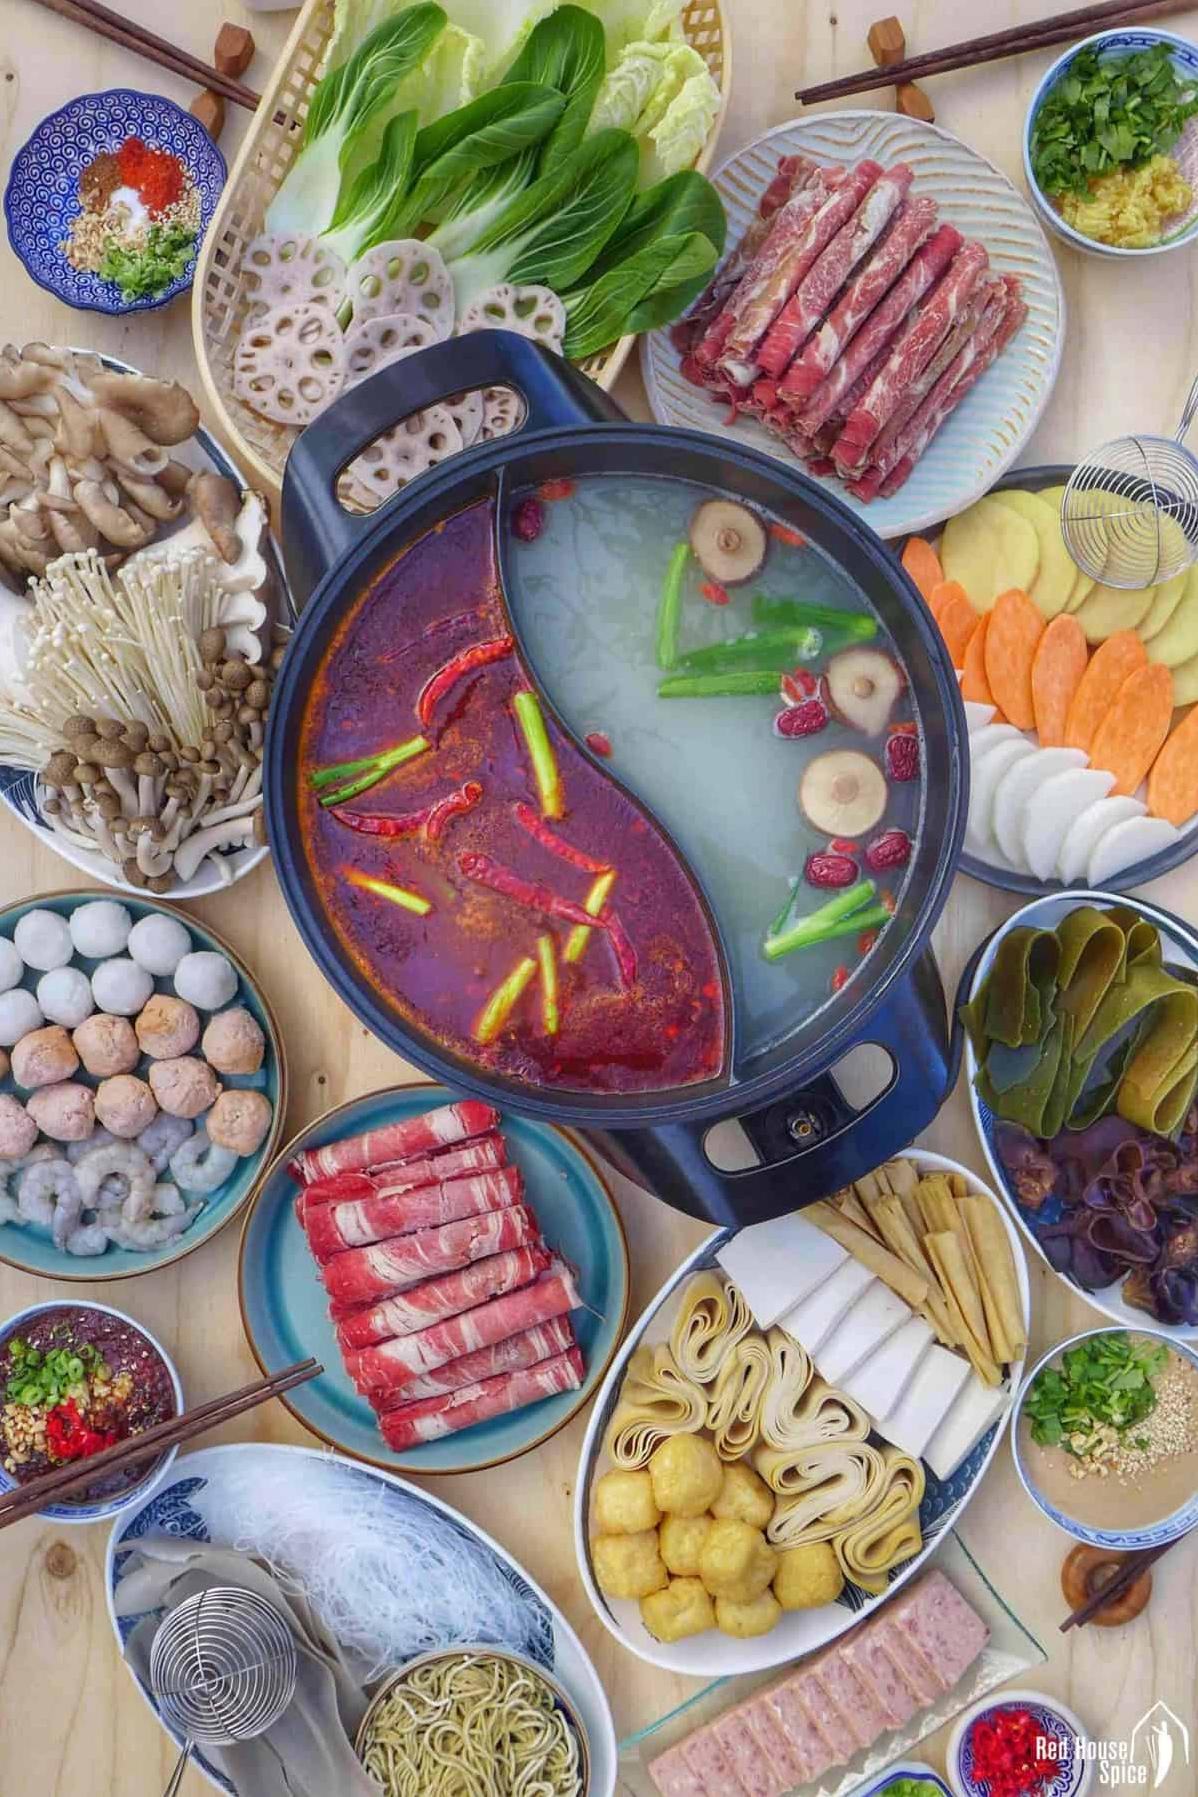  Add some heat and spice to your day with this hot pot.